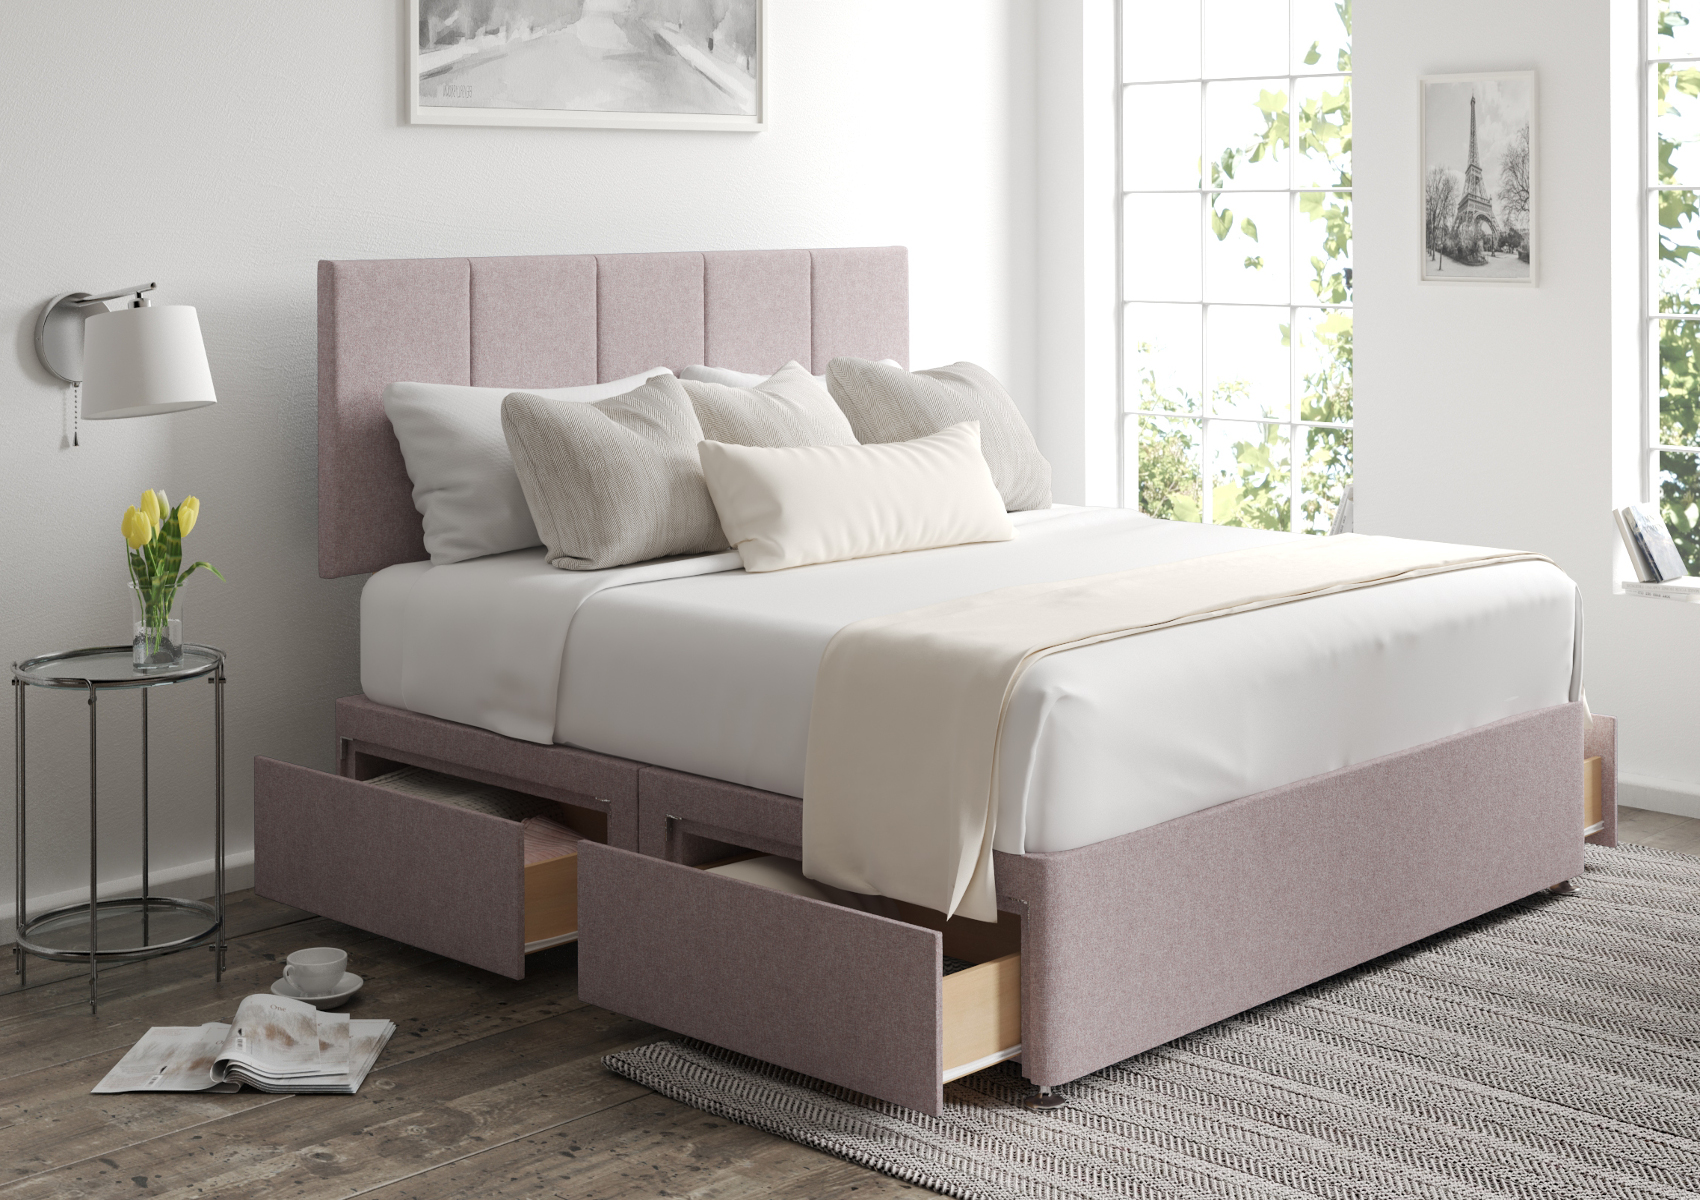 View Hannah Trebla Stone Upholstered Double Bed Time4Sleep information